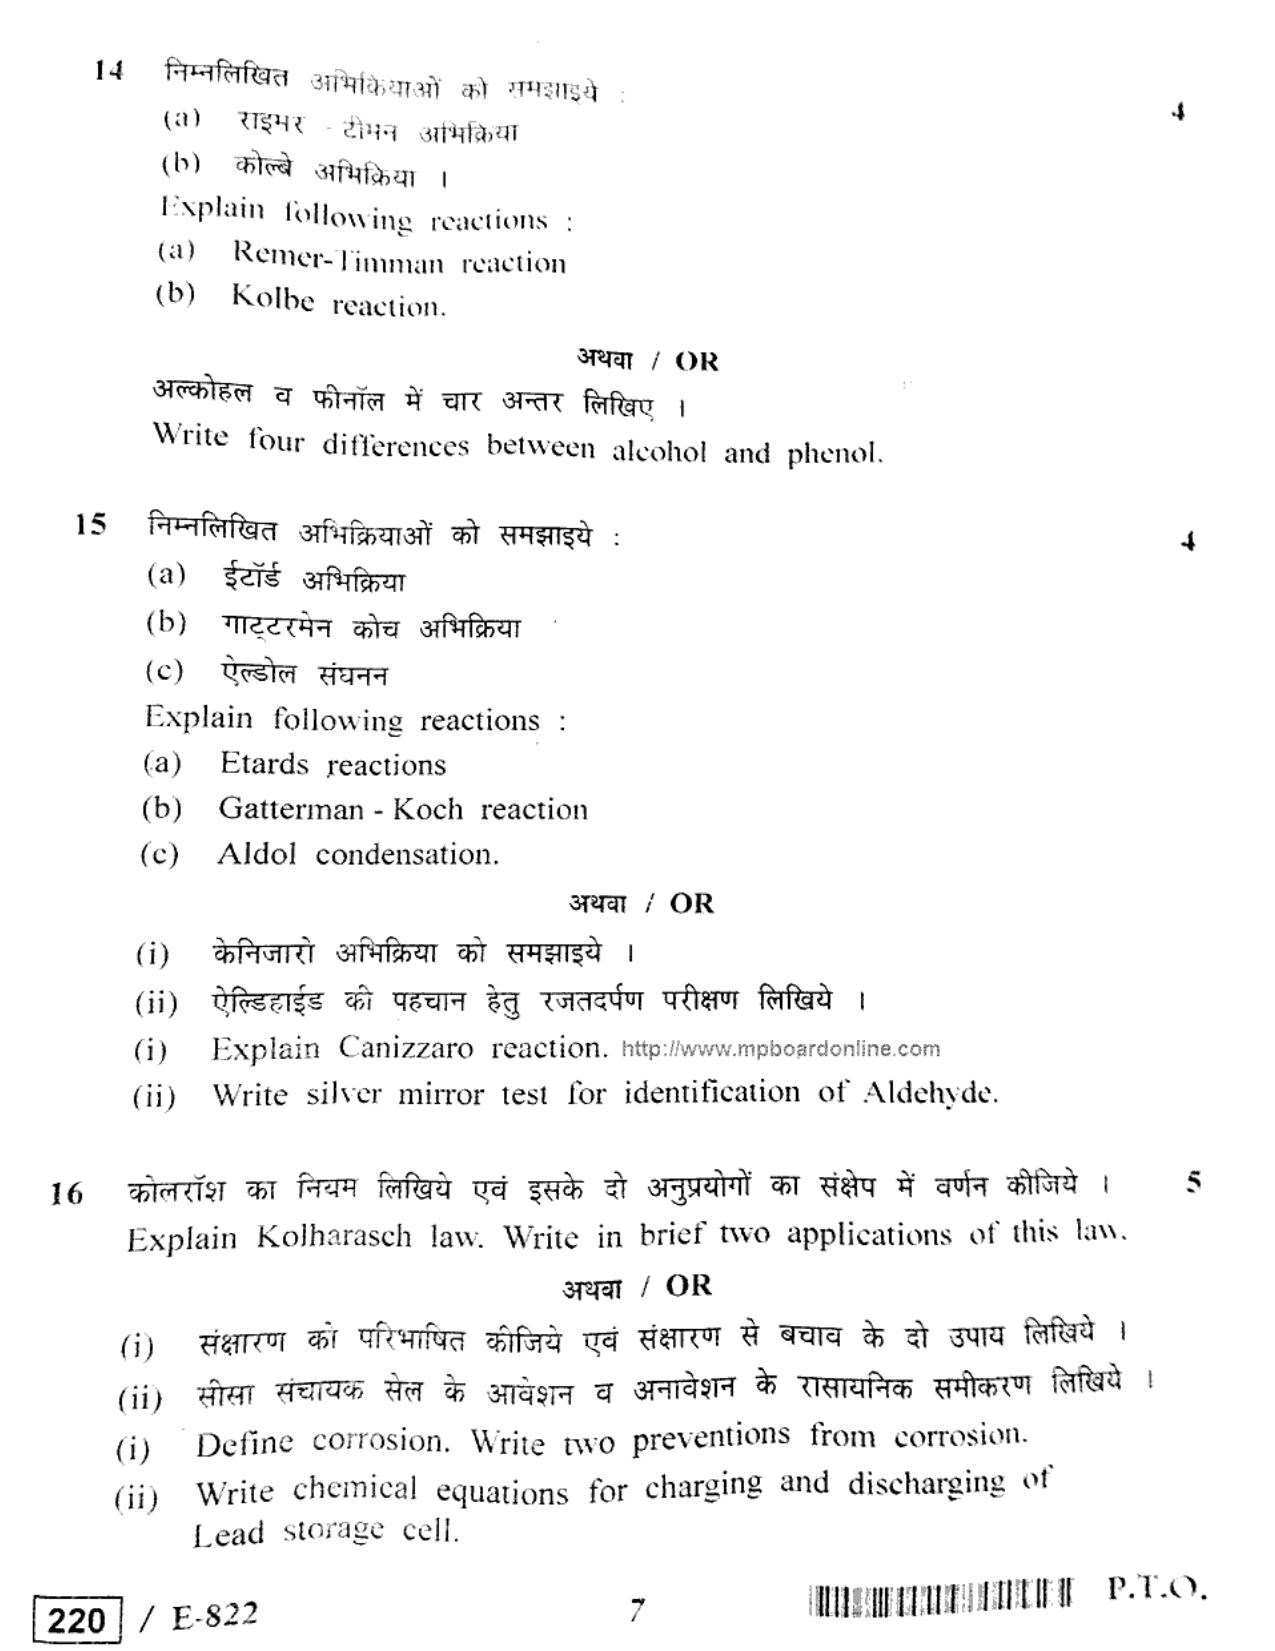 MP Board Class 12 Chemistry 2020 Question Paper - Page 7